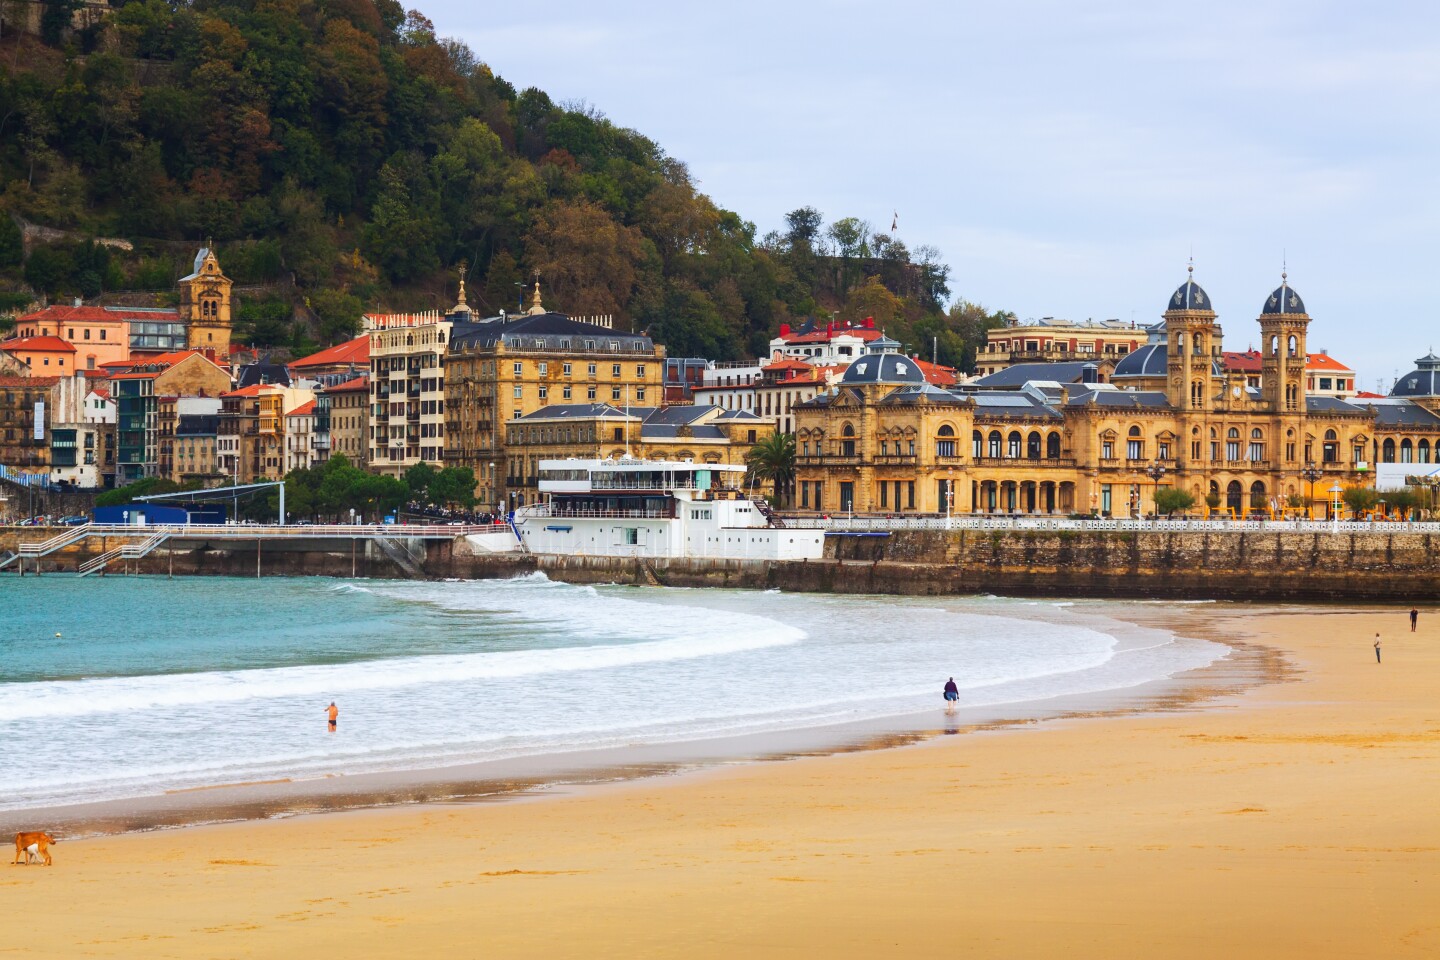 <h2>7. San Sebastian</h2> <p><i>Basque Country</i></p> <p>The origins of the Basque people are up for debate, but the ethnic group—spread throughout southern France and Spain’s eponymous autonomous community—has developed a culture unlike the rest of the country. <a class="Link" href="https://www.afar.com/travel-guides/spain/san-sebastian/guide" rel="noopener">San Sebastián</a> is one of the cities found in Basque Country, where Euskara is spoken on the streets—forgo the <i>hola </i>and greet people with <i>kaixo</i>—and the steep cliff sides resemble those in Ireland or Scotland. Indulge in small plates known as <i>pintxos </i>of prepared cod and local bounty, but make some reservations too, because the food scene here is top notch: 10 Michelin-starred restaurants are spread throughout this city of 190,000.</p>